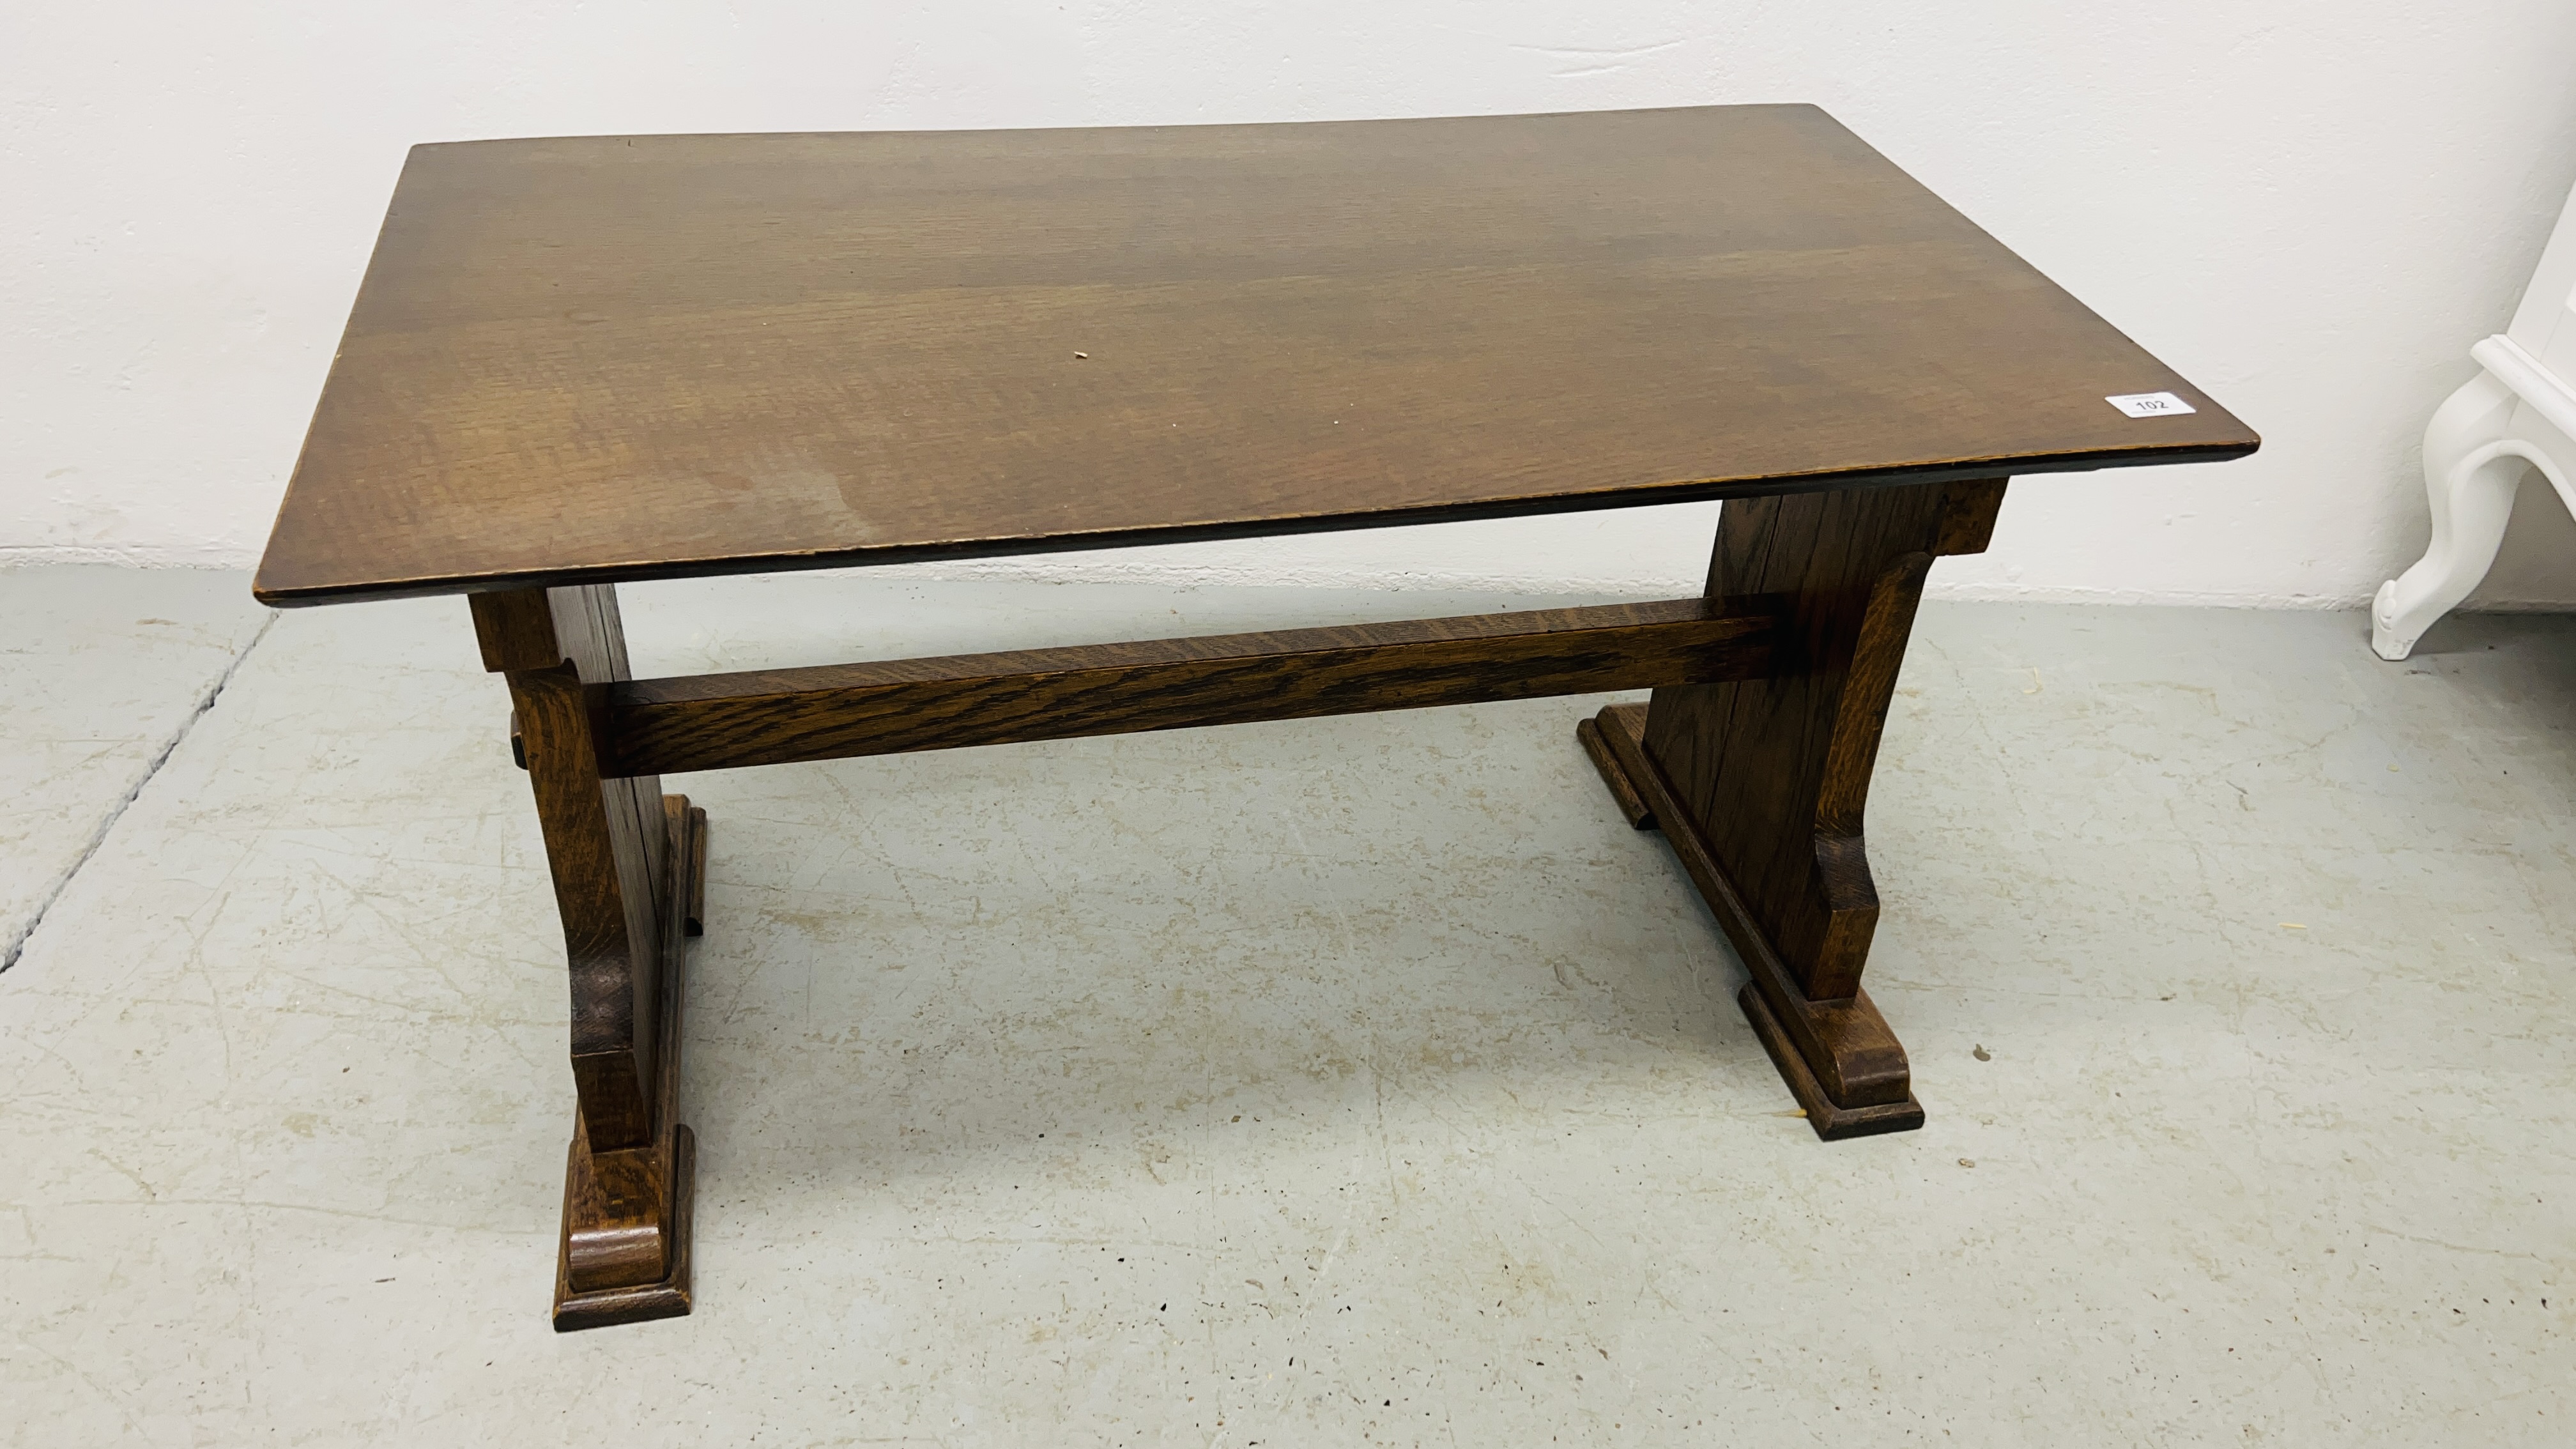 A SOLID OAK REFECTORY STYLE COFFEE TABLE WIDTH 50CM. LENGTH 89CM. HEIGHT 50CM.